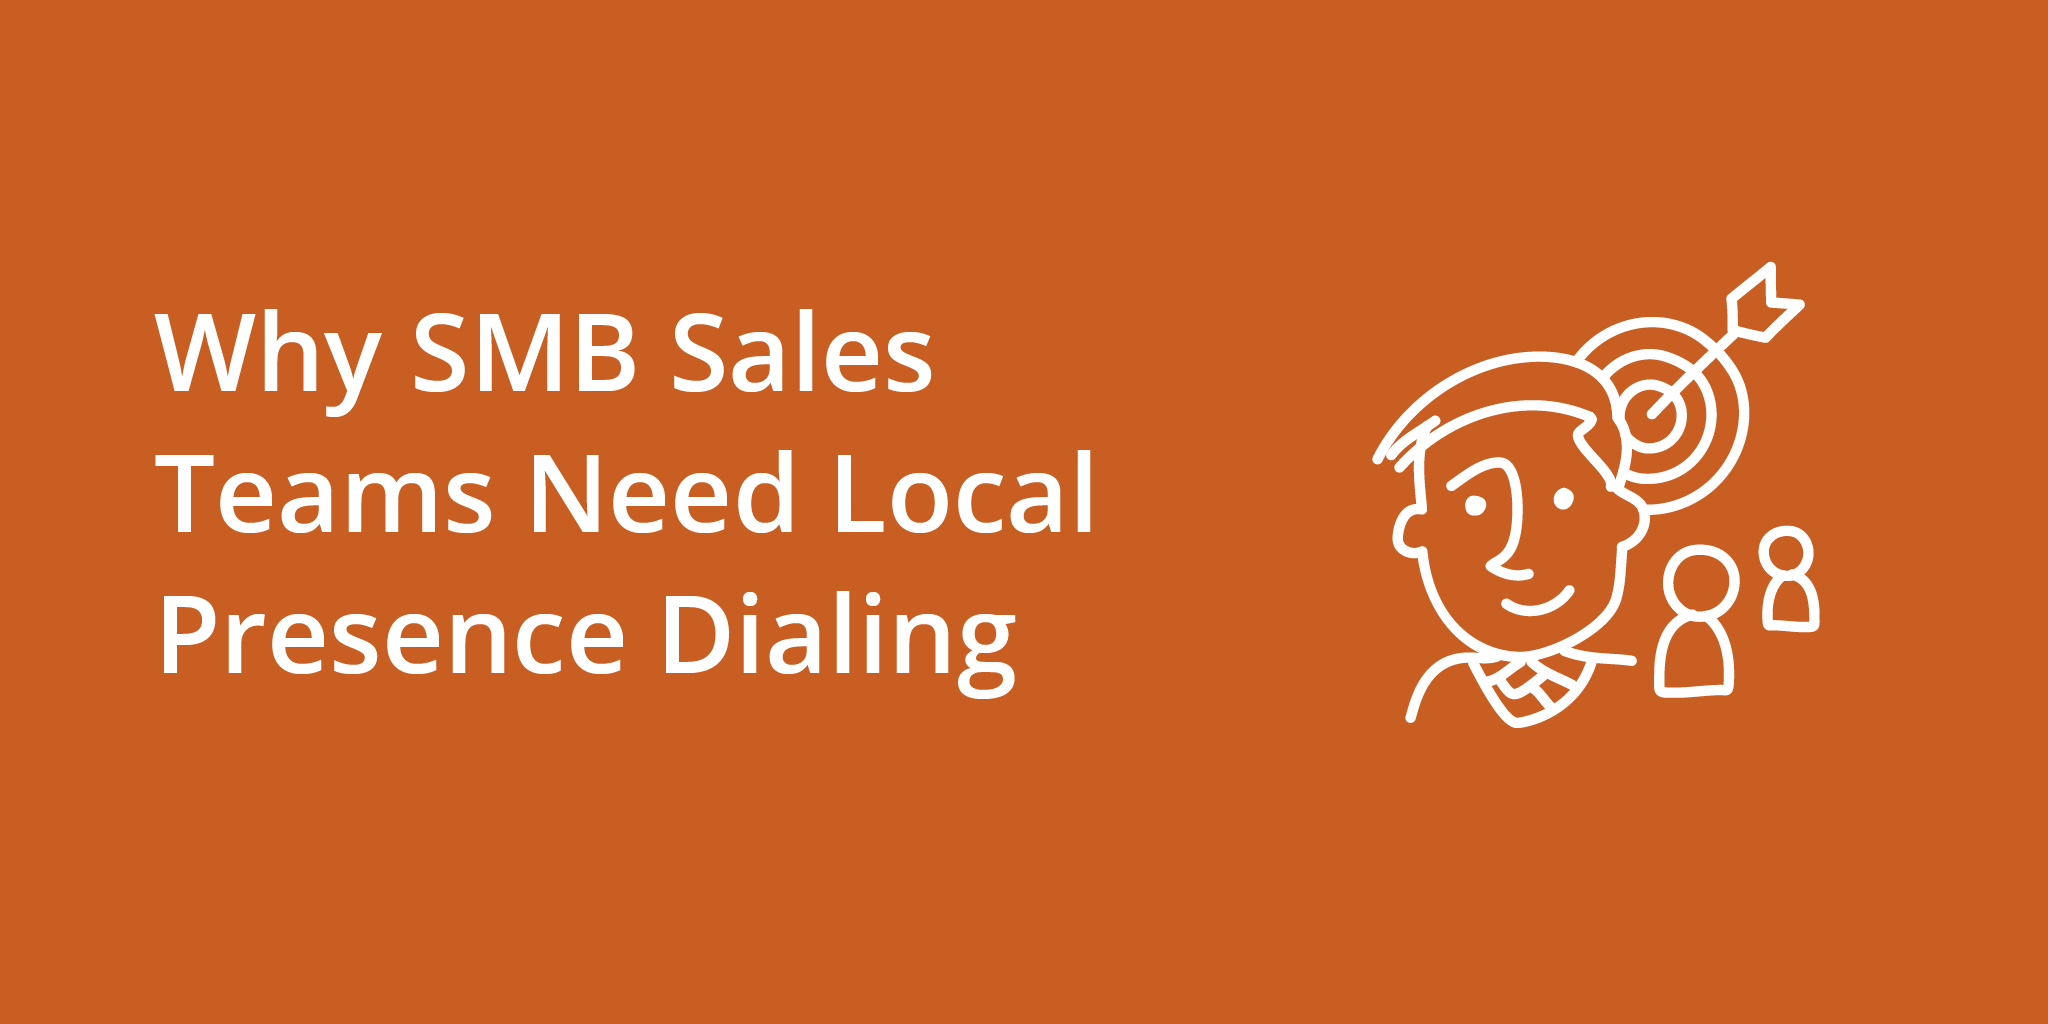 Why SMB Sales Teams Need Local Presence Dialing | Telephones for business